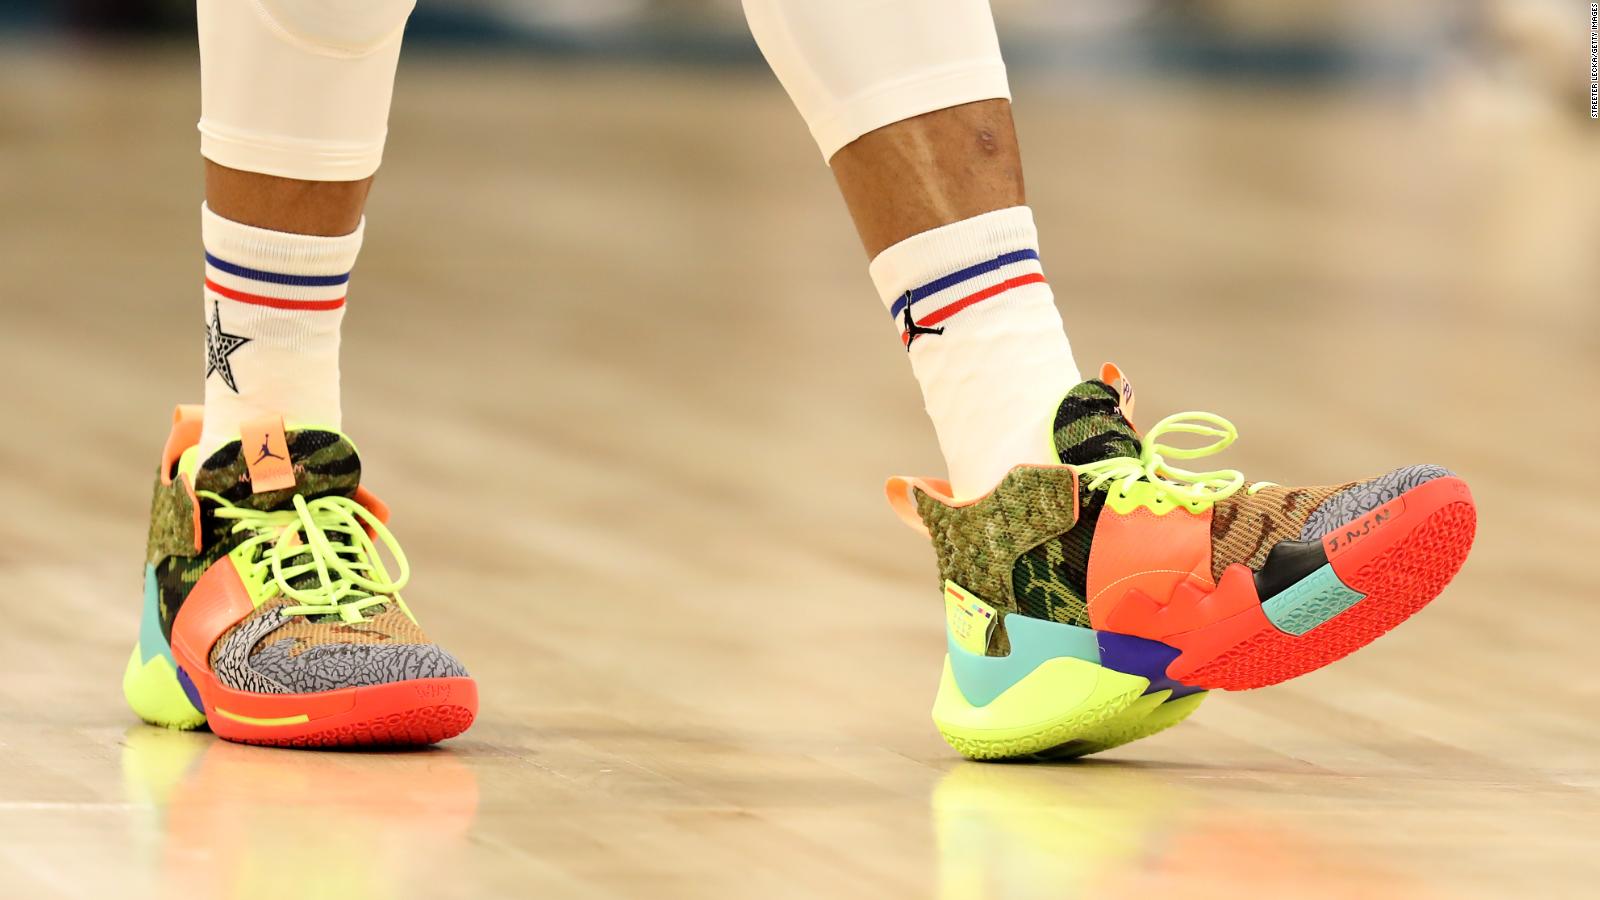 westbrook all star shoes